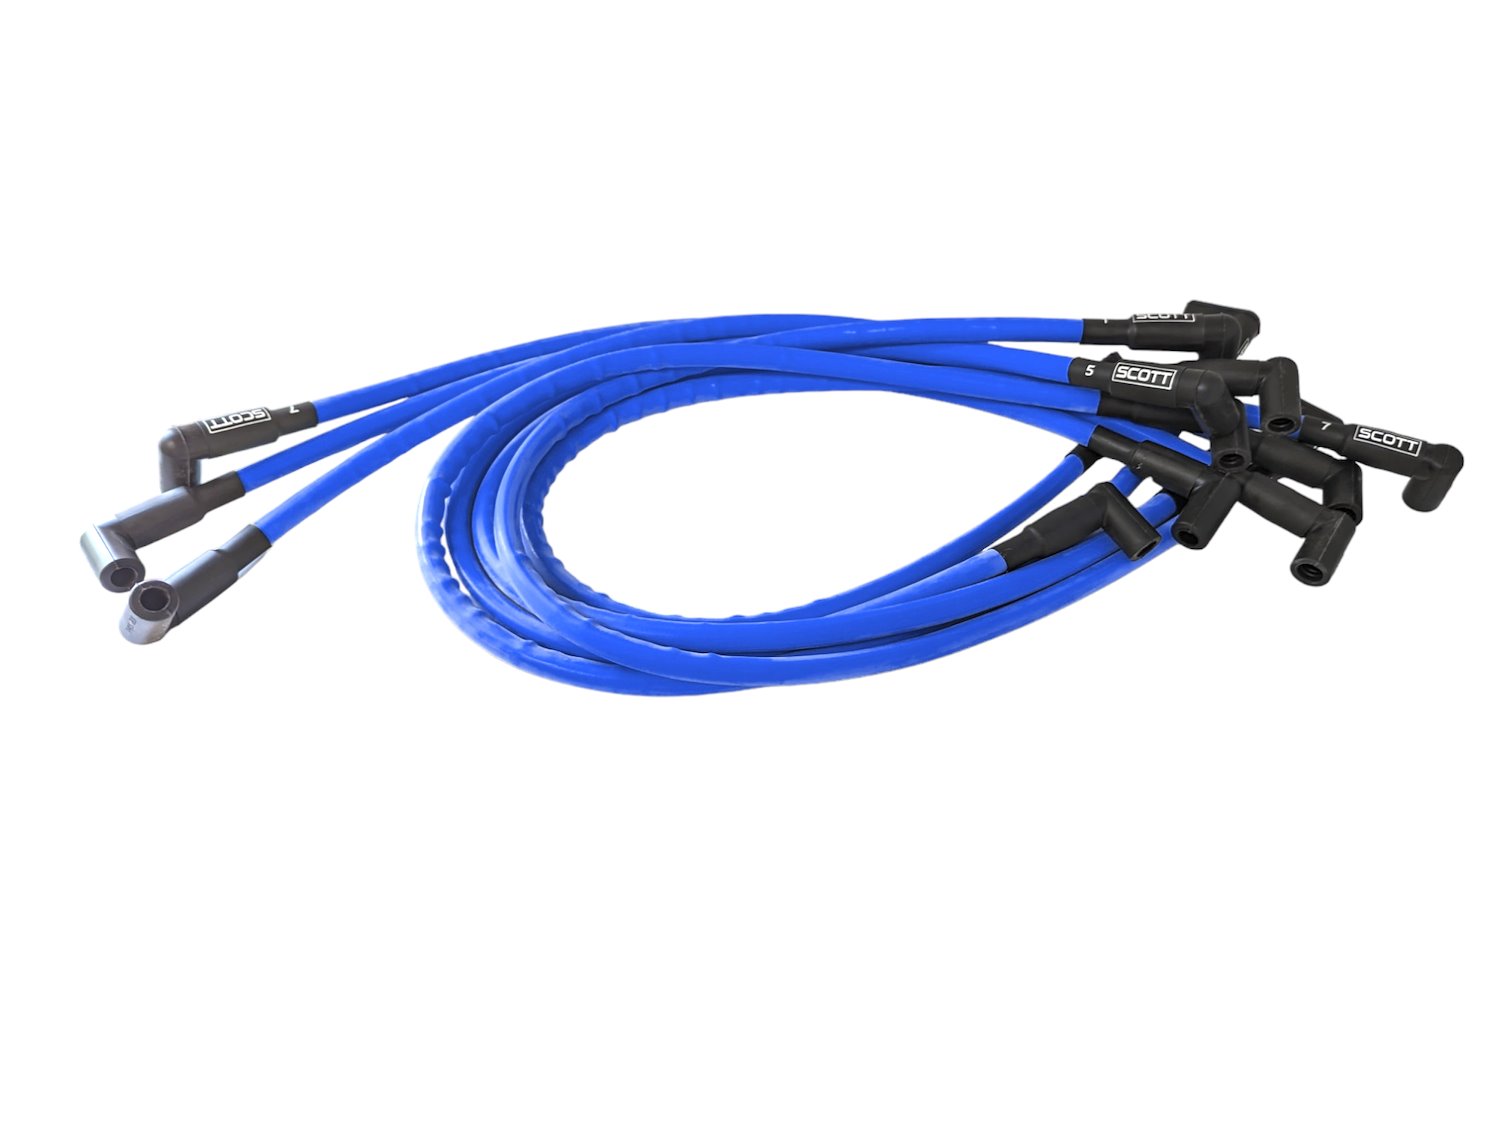 SPW-CH-439-4 High-Performance Silicone-Sleeved Spark Plug Wire Set for Small Block Ford, Under Header [Blue]